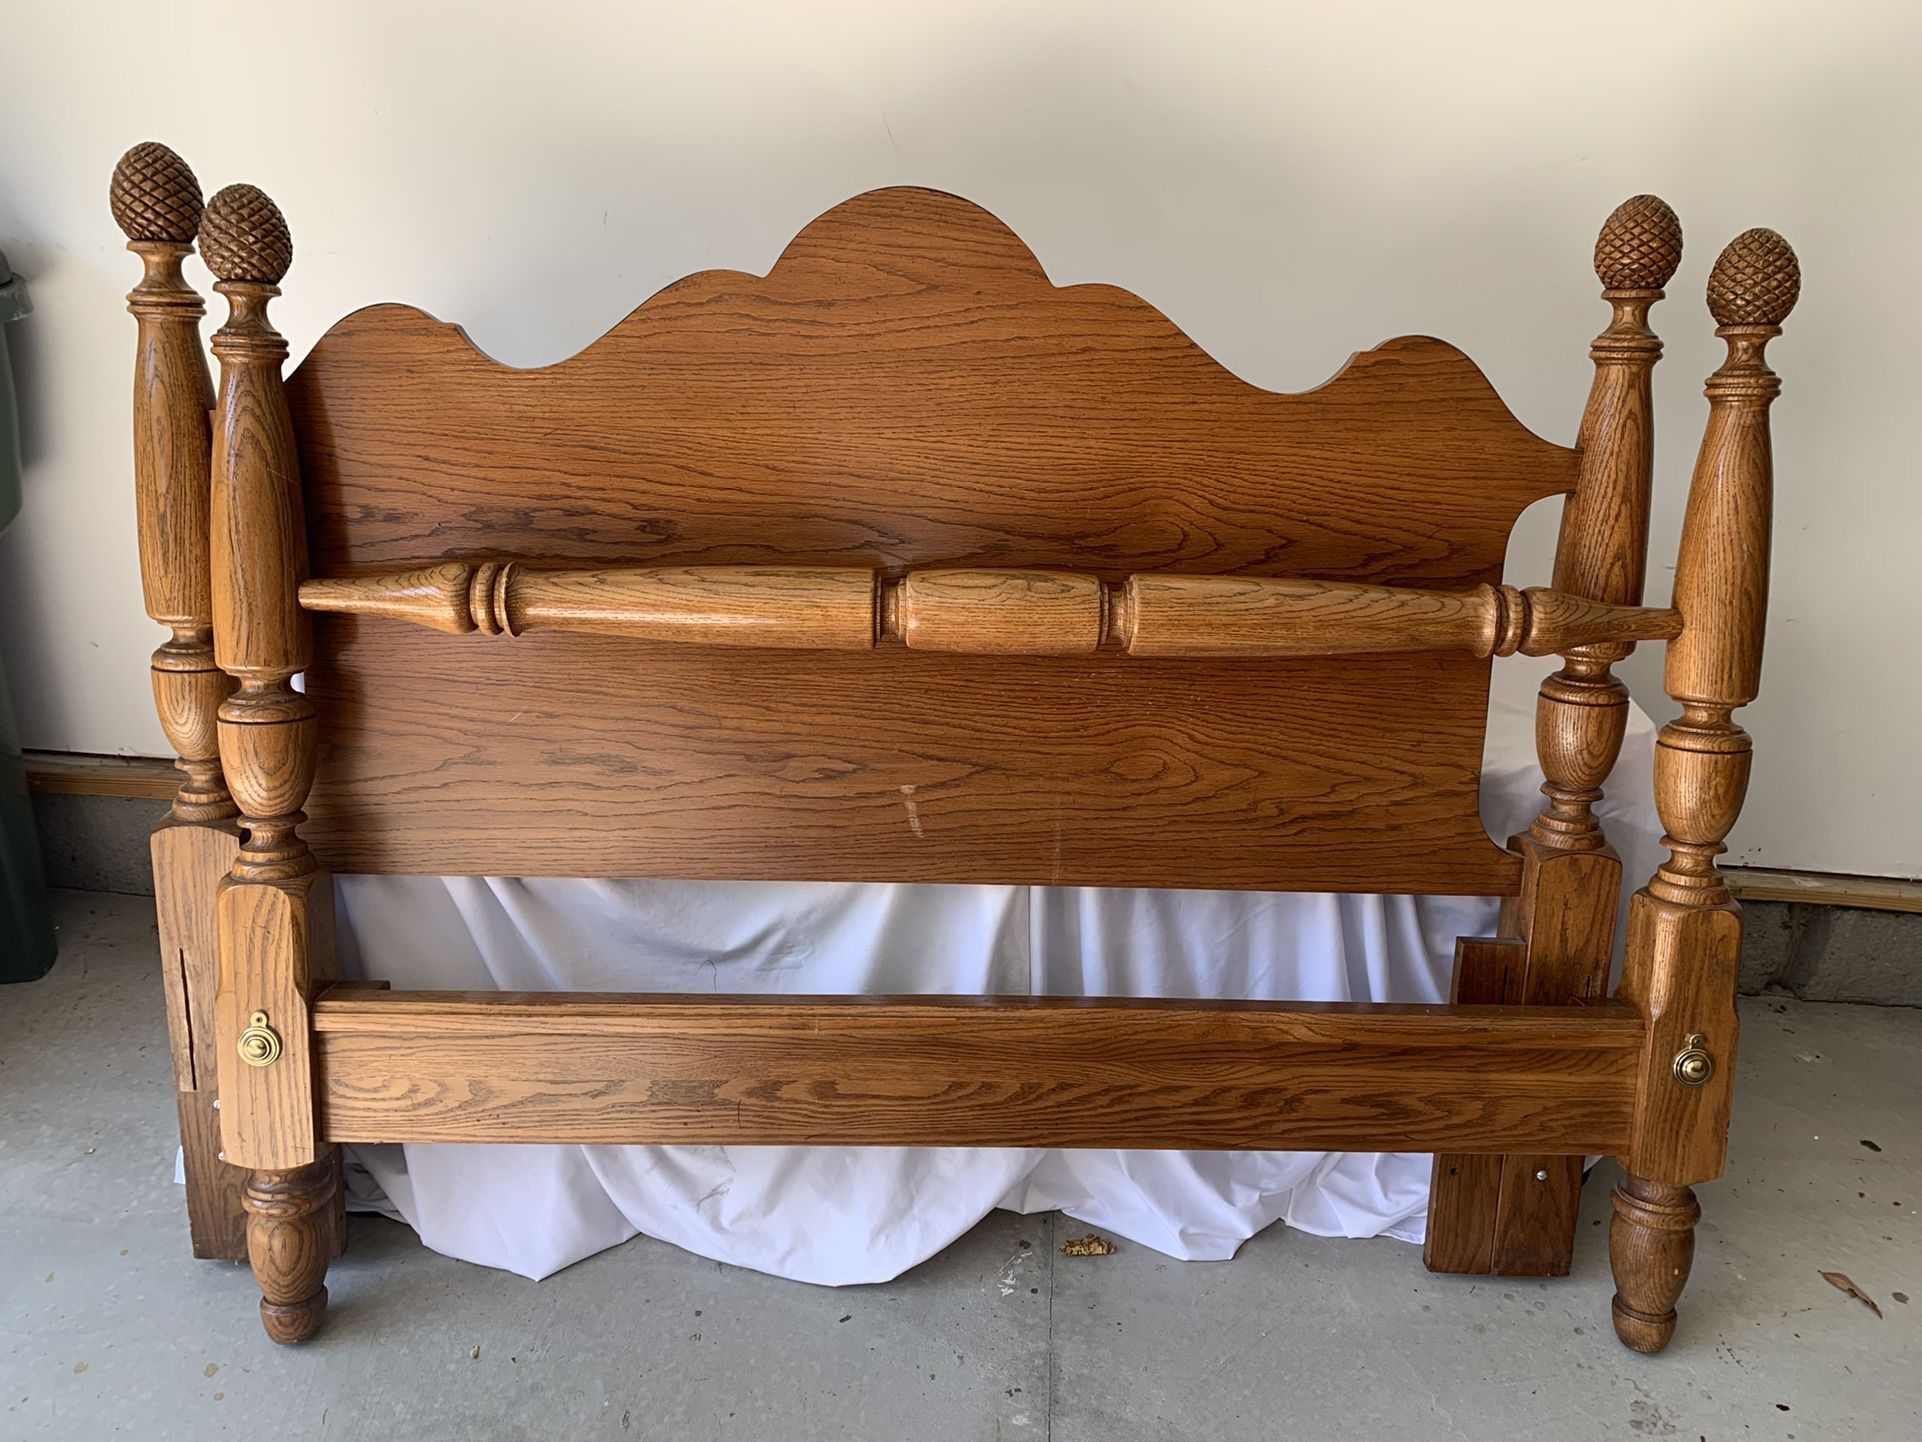 Thomasville queen size bed frame